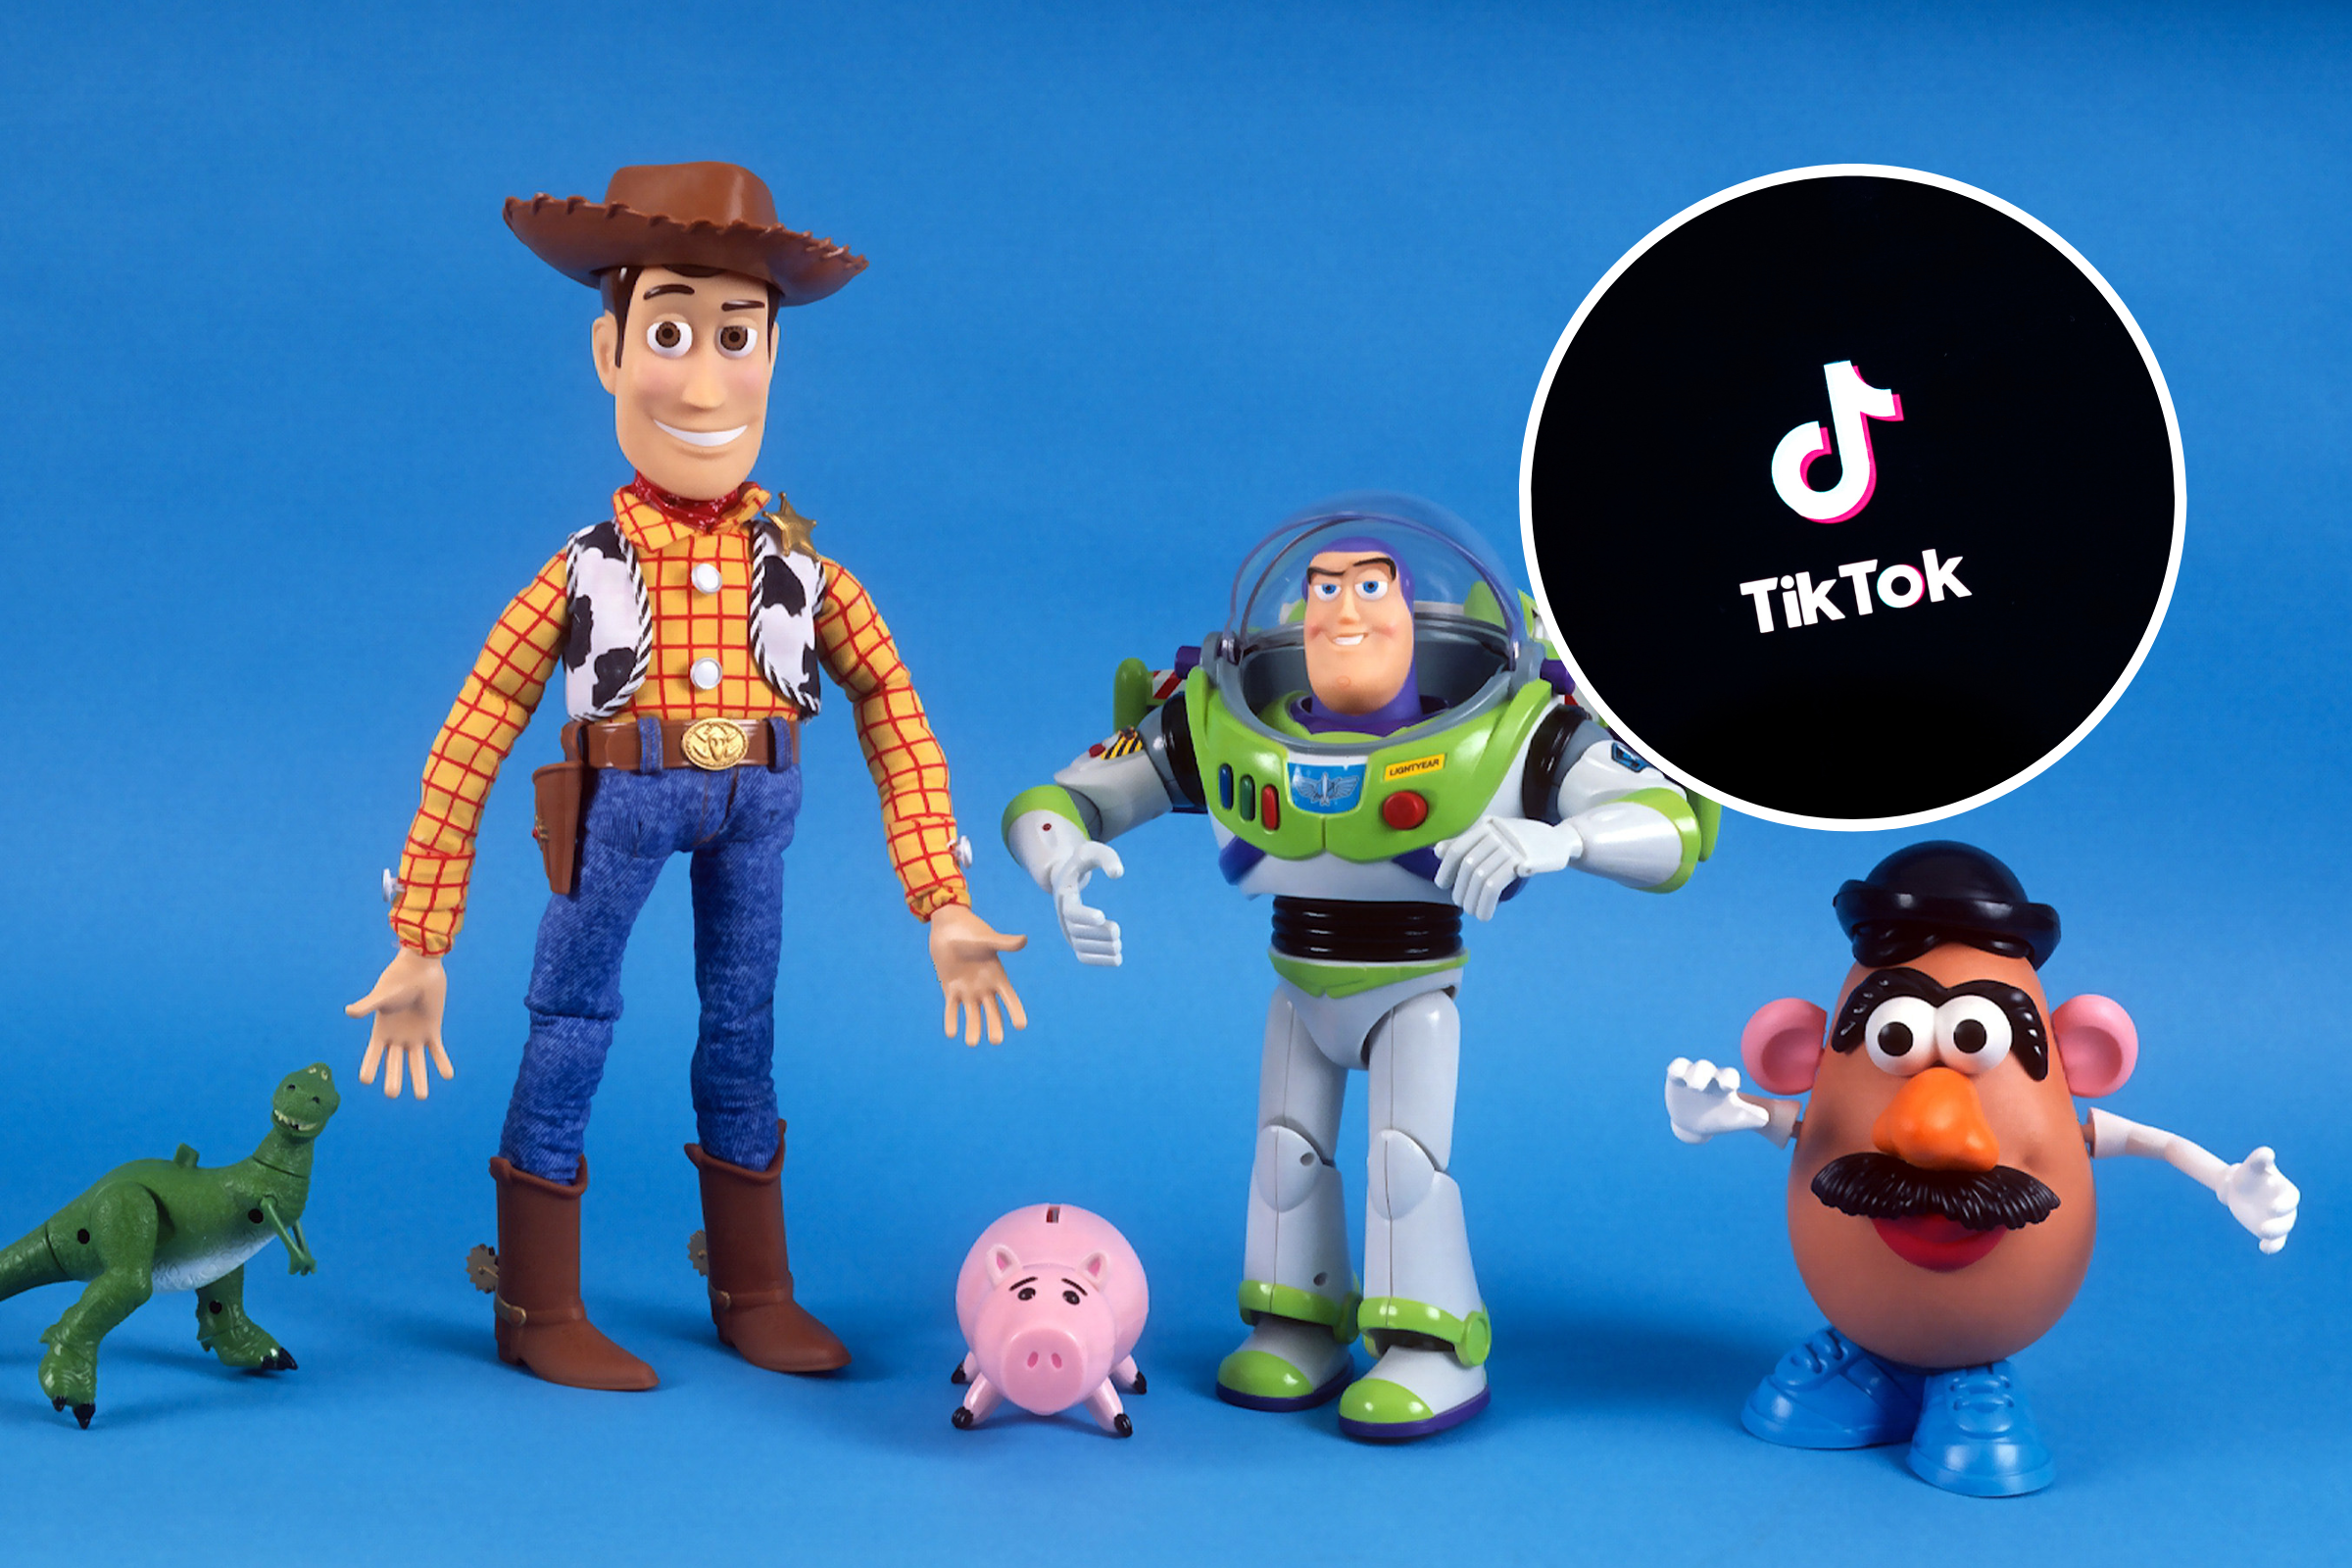 Toy Story 3' Scene Goes Viral as Fans Think They Hear Doll Using Expletive